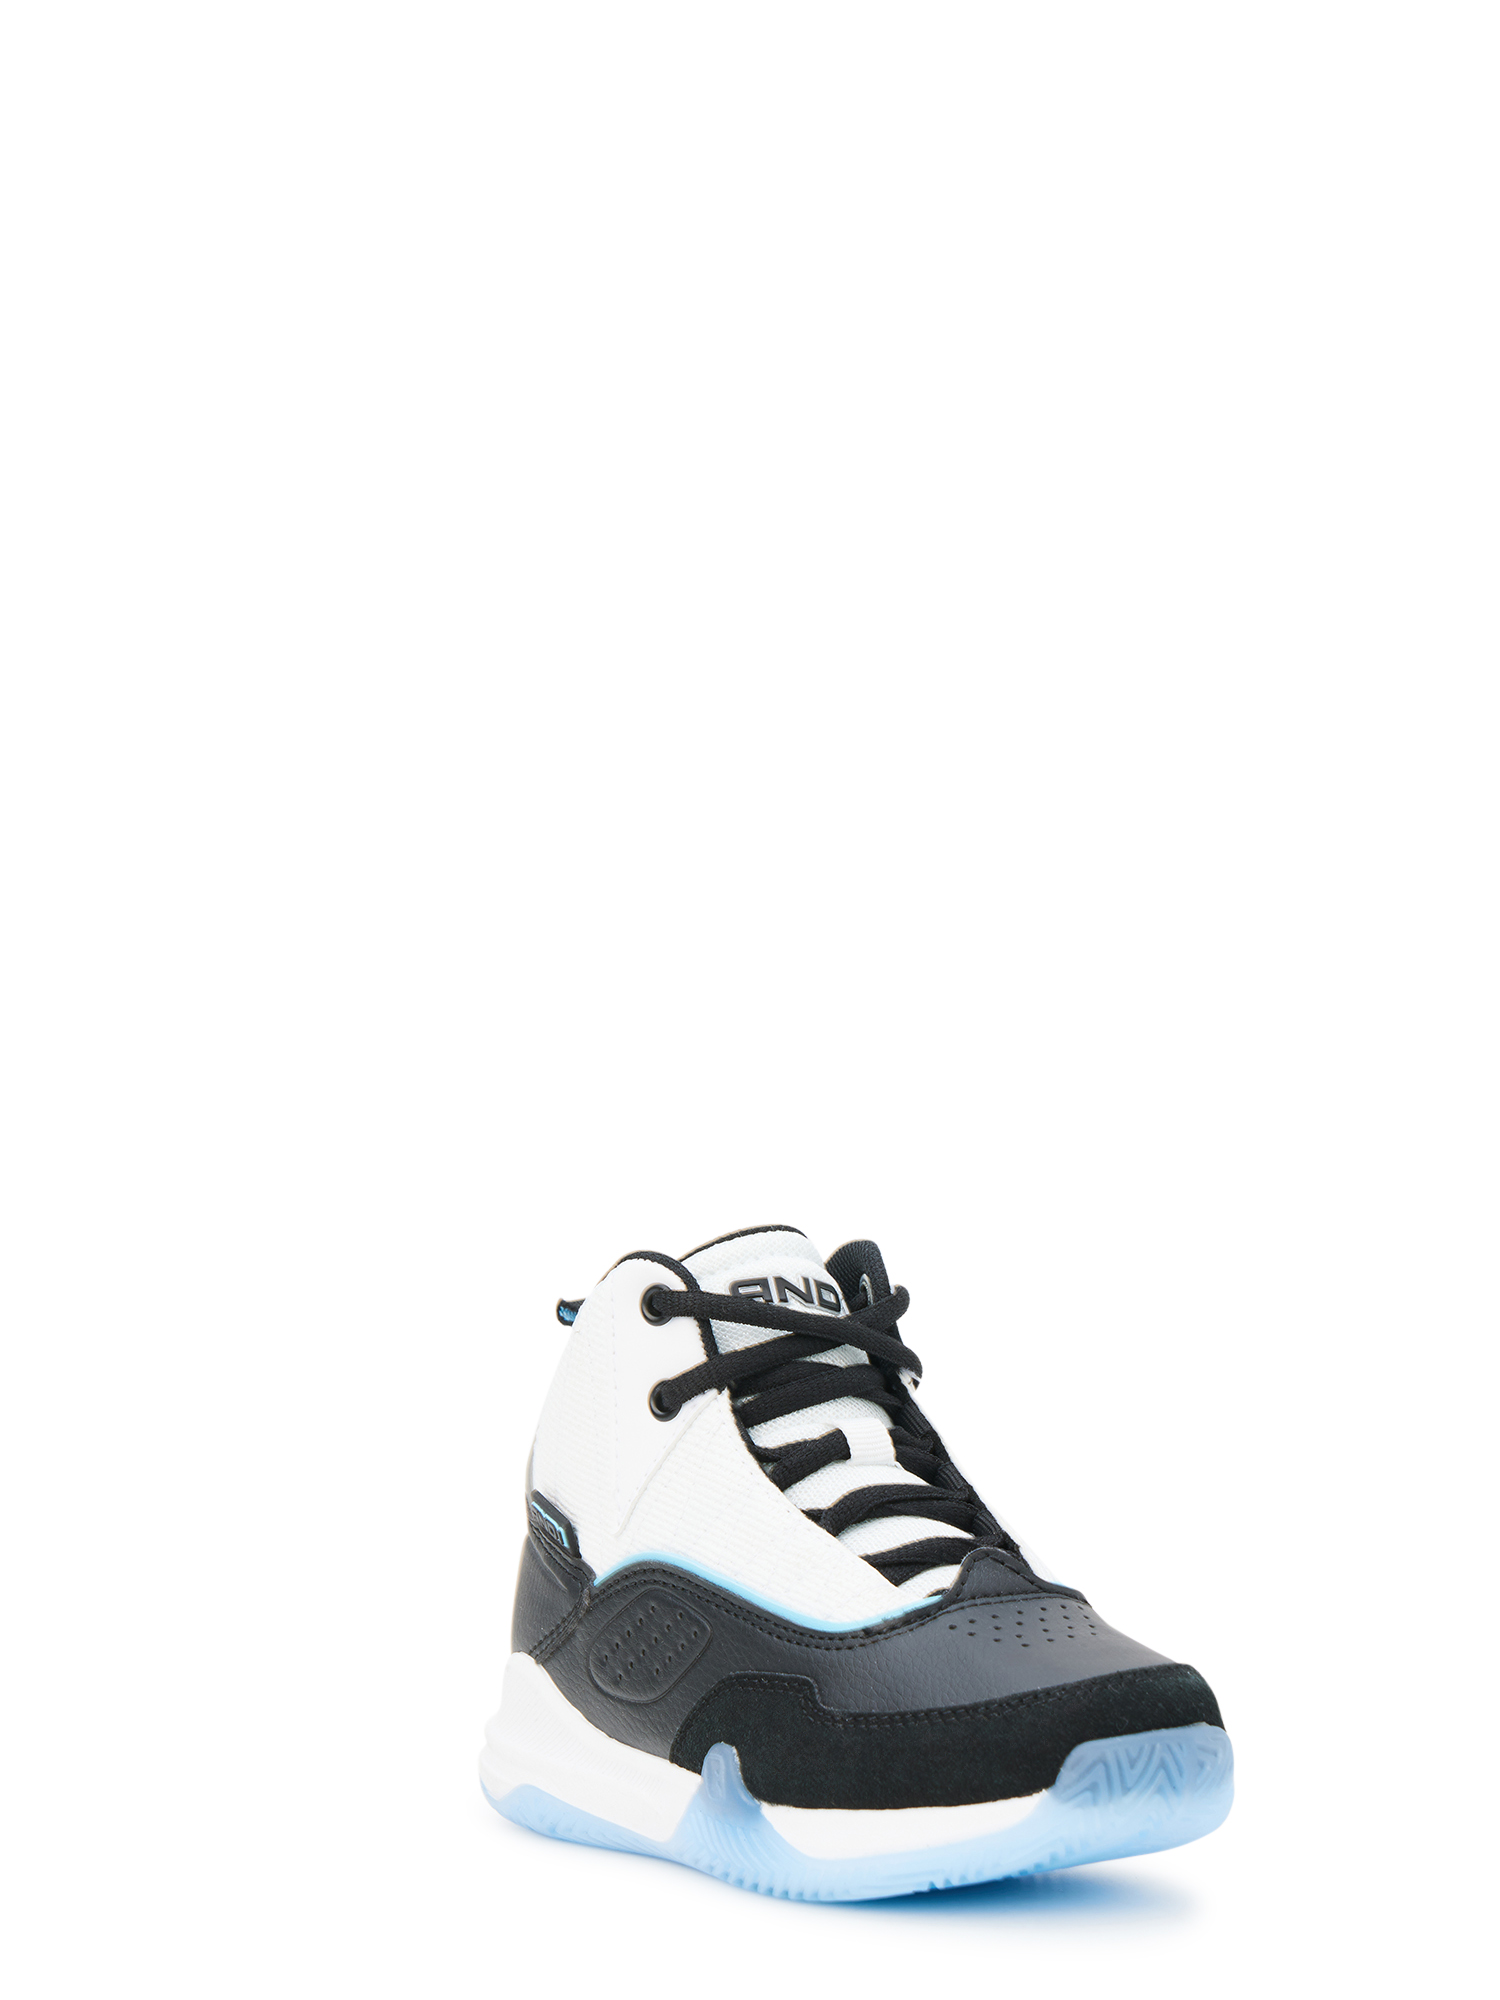 AND1 Little & Big Boys Lace-up Basketball Sneakers 2.0, Sizes 13-6